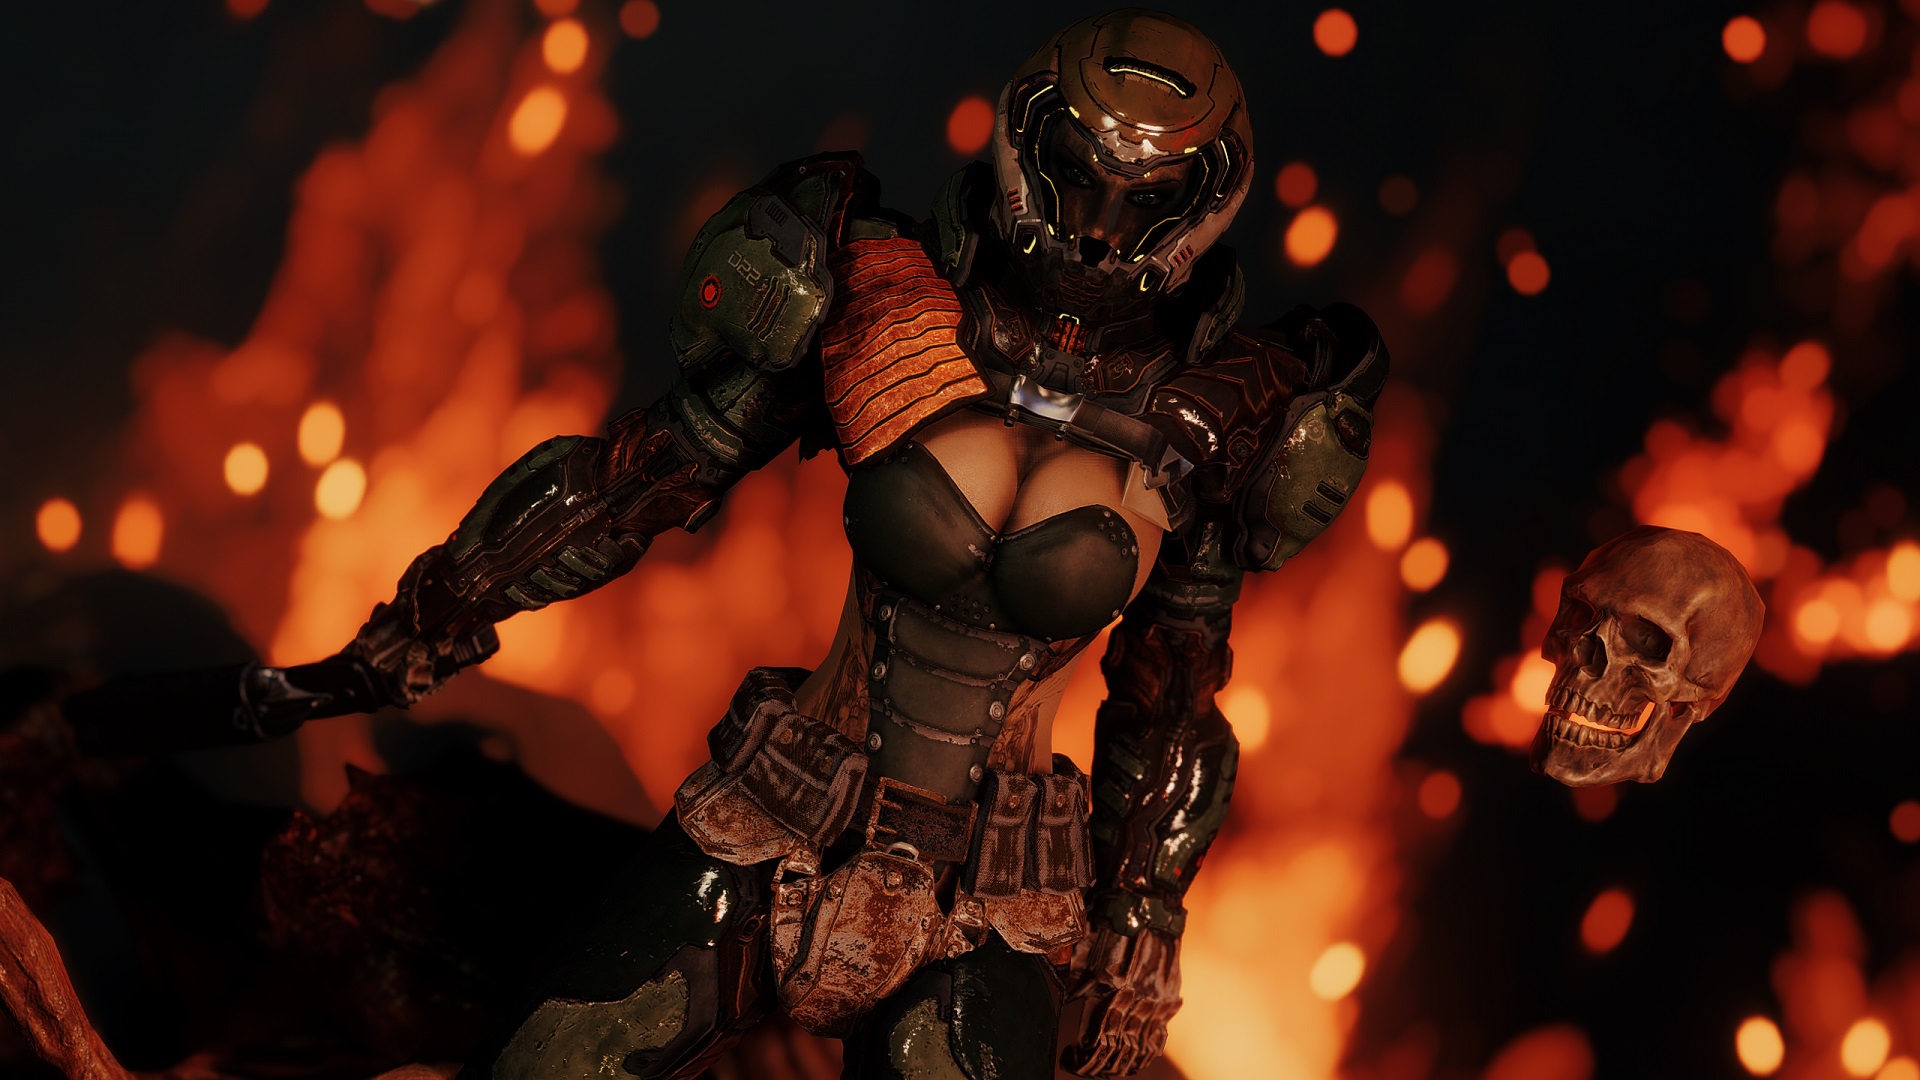 Doom Eternal Director Has “Put A Lot of Thought” Into Creating a Female Slayer